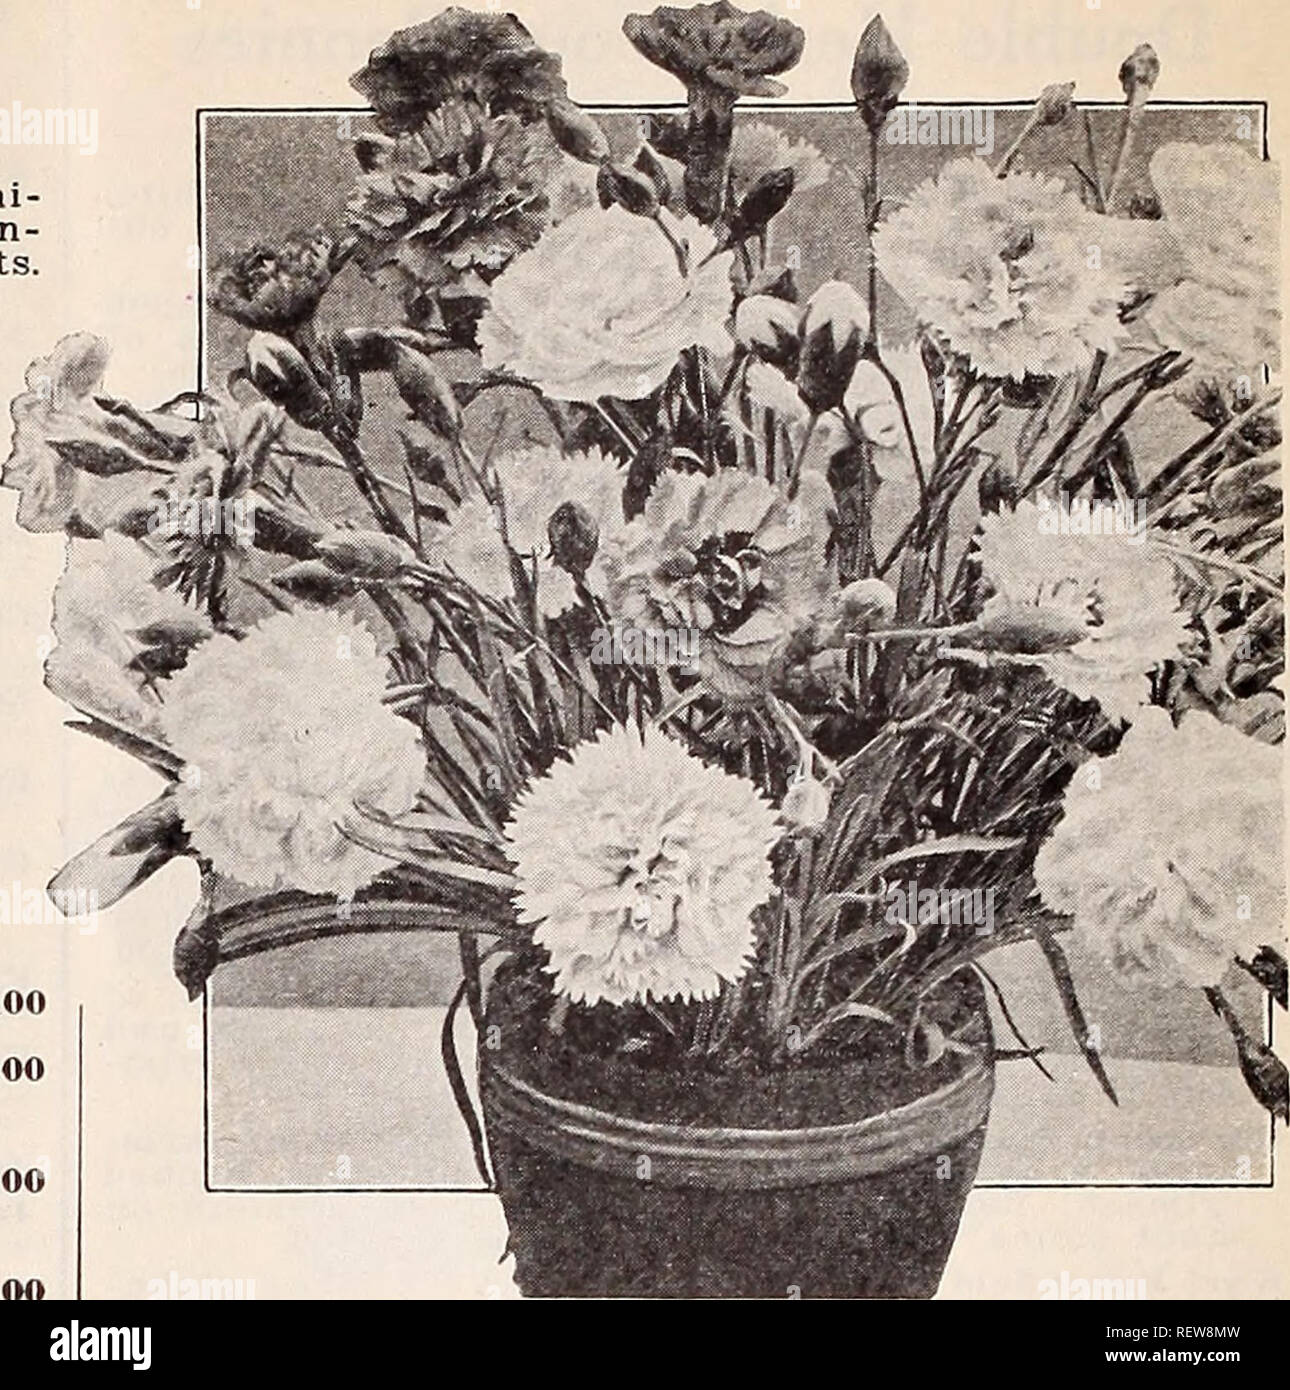 . Dreer's wholesale price list for florists : special spring edition. Bulbs (Plants) Catalogs; Vegetables Seeds Catalogs; Flowers Seeds Catalogs; Nurseries (Horticulture) Catalogs; Gardening Equipment and supplies Catalogs. 72 HENRY A. DREER Hardy Plants wholesale list Early Flowering Hardy Phlox Miss Lingard (p. suirruticosa) This grand free-flowering white variety is a uni- versal favorite, coming into flower in May; it con- tinues in flower throughout the season. 3-inch pots $1.25 per doz.; $S.OO per 100; $75.00 per 1000. Phlox Subulata (Moss or Mountain Pink) Per doz. Per 100 Alba. White.  Stock Photo